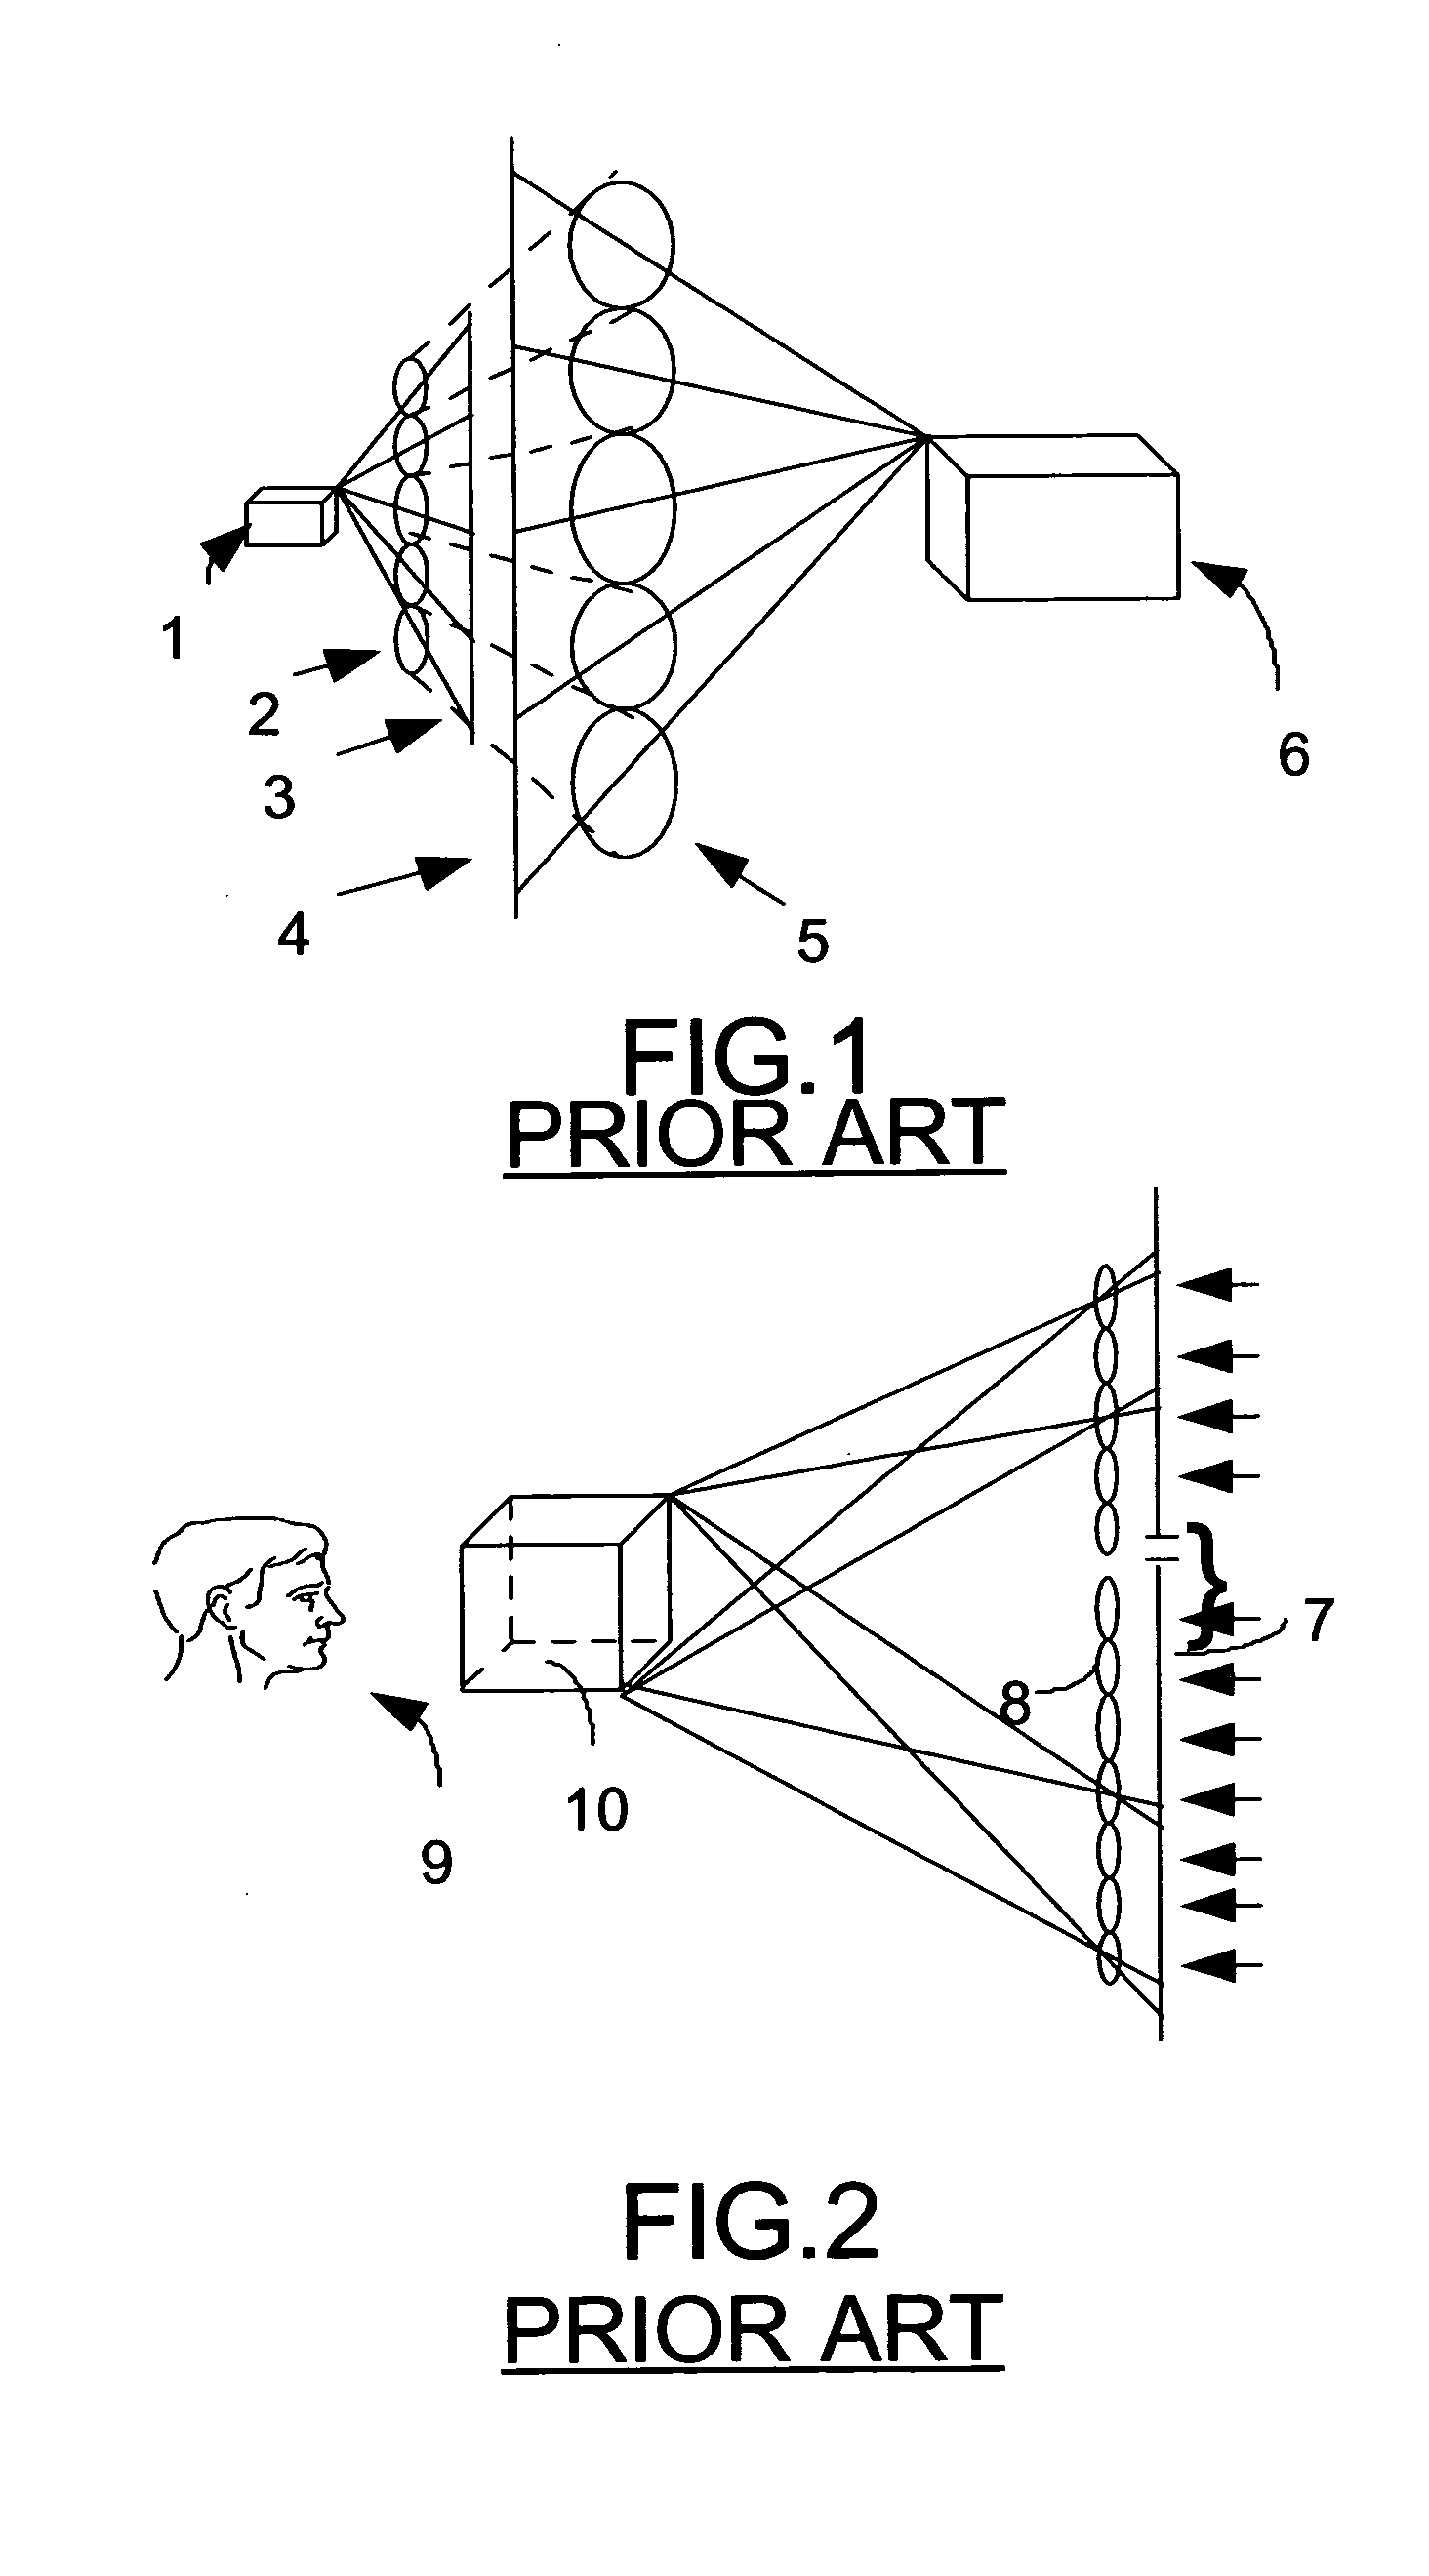 System and apparatus for recording, transmitting, and projecting digital three-dimensional images